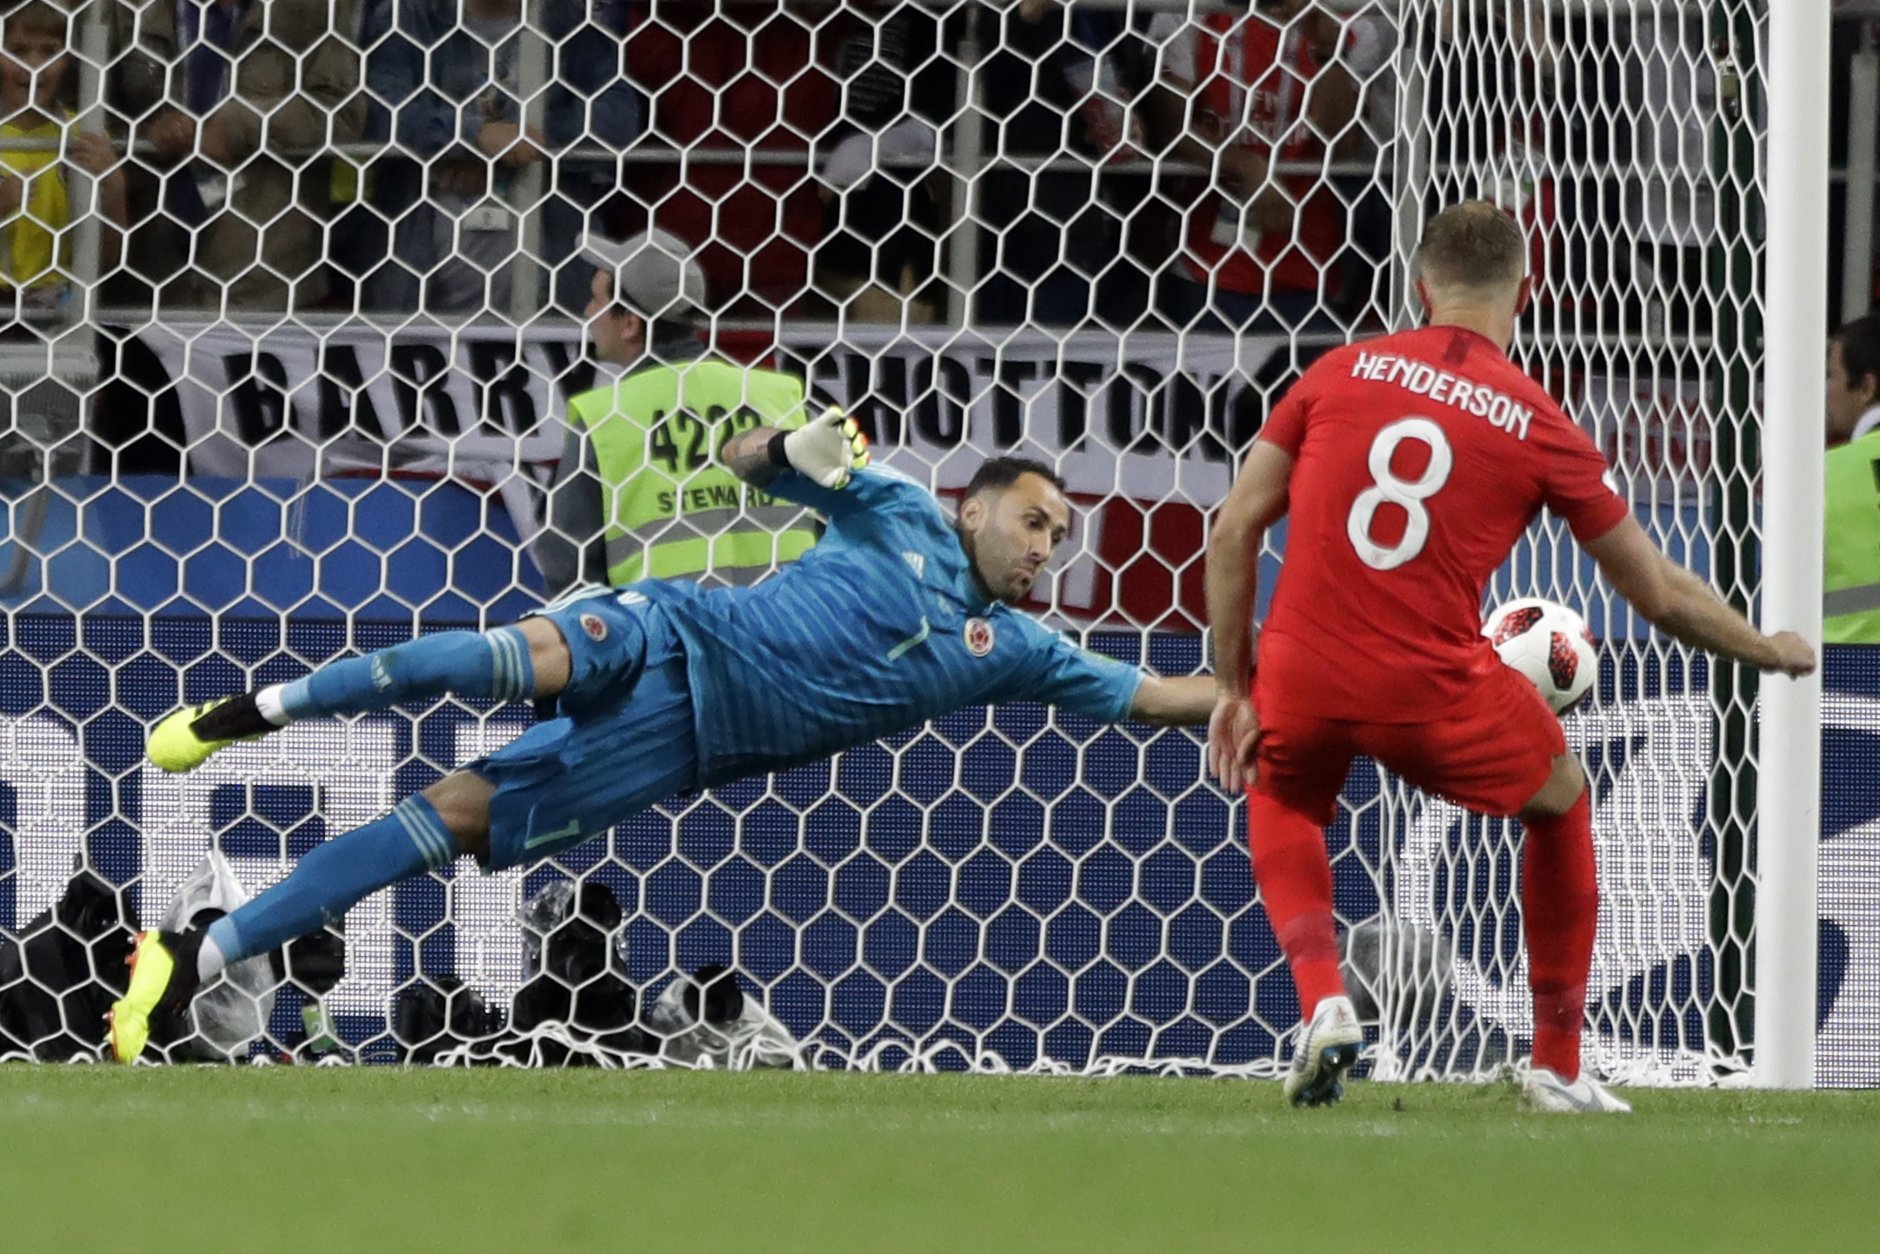 Colombia goalkeeper David Ospina saves a penalty during the round of 16 match between Colombia and England at the 2018 soccer World Cup in the Spartak Stadium, in Moscow, Russia, Tuesday, July 3, 2018. (AP Photo/Matthias Schrader)